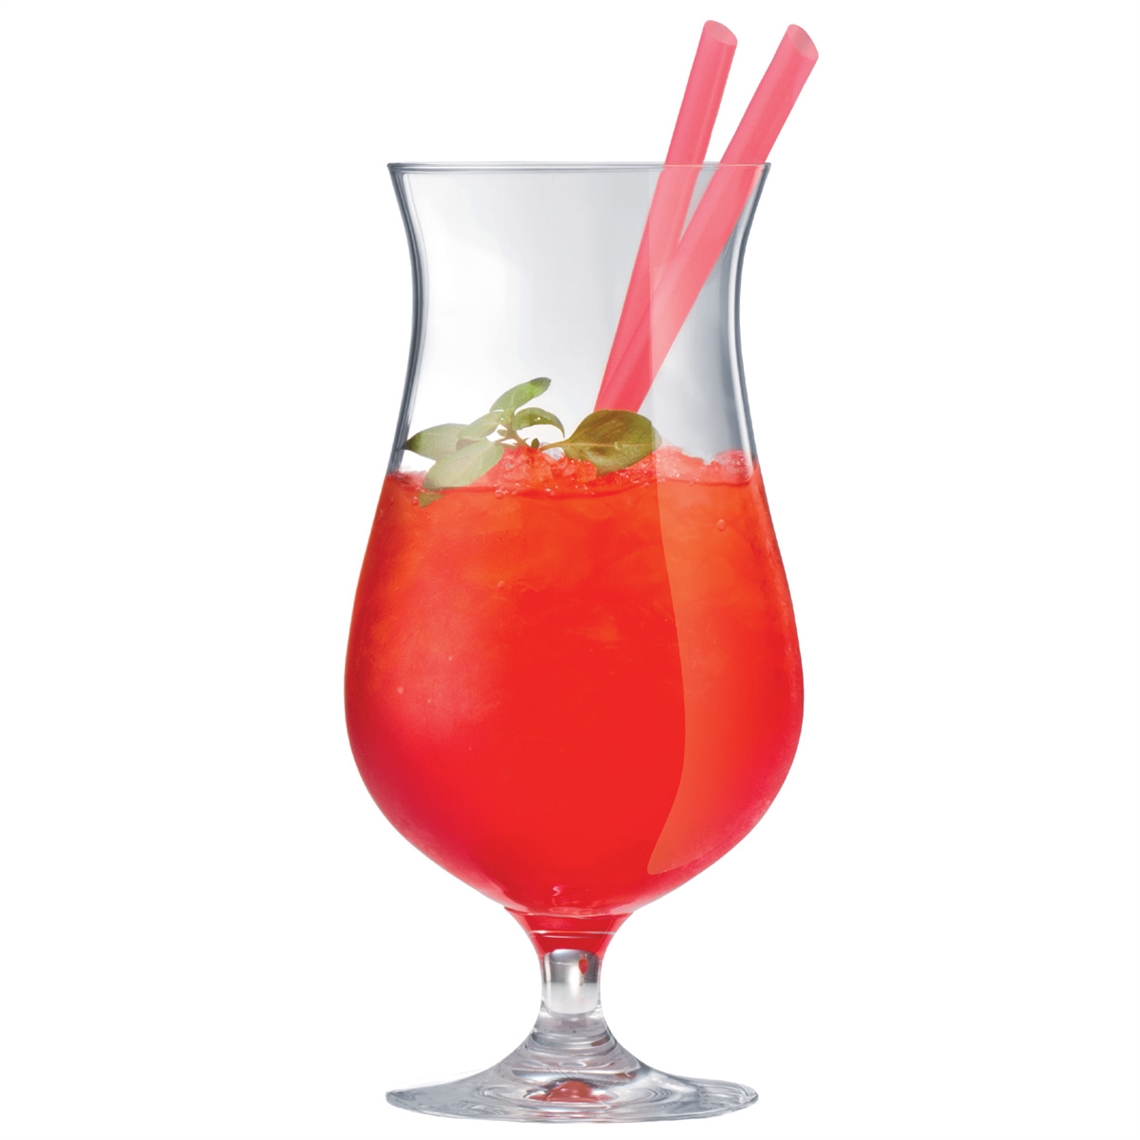 View more glass and co from our Cocktail Glasses range